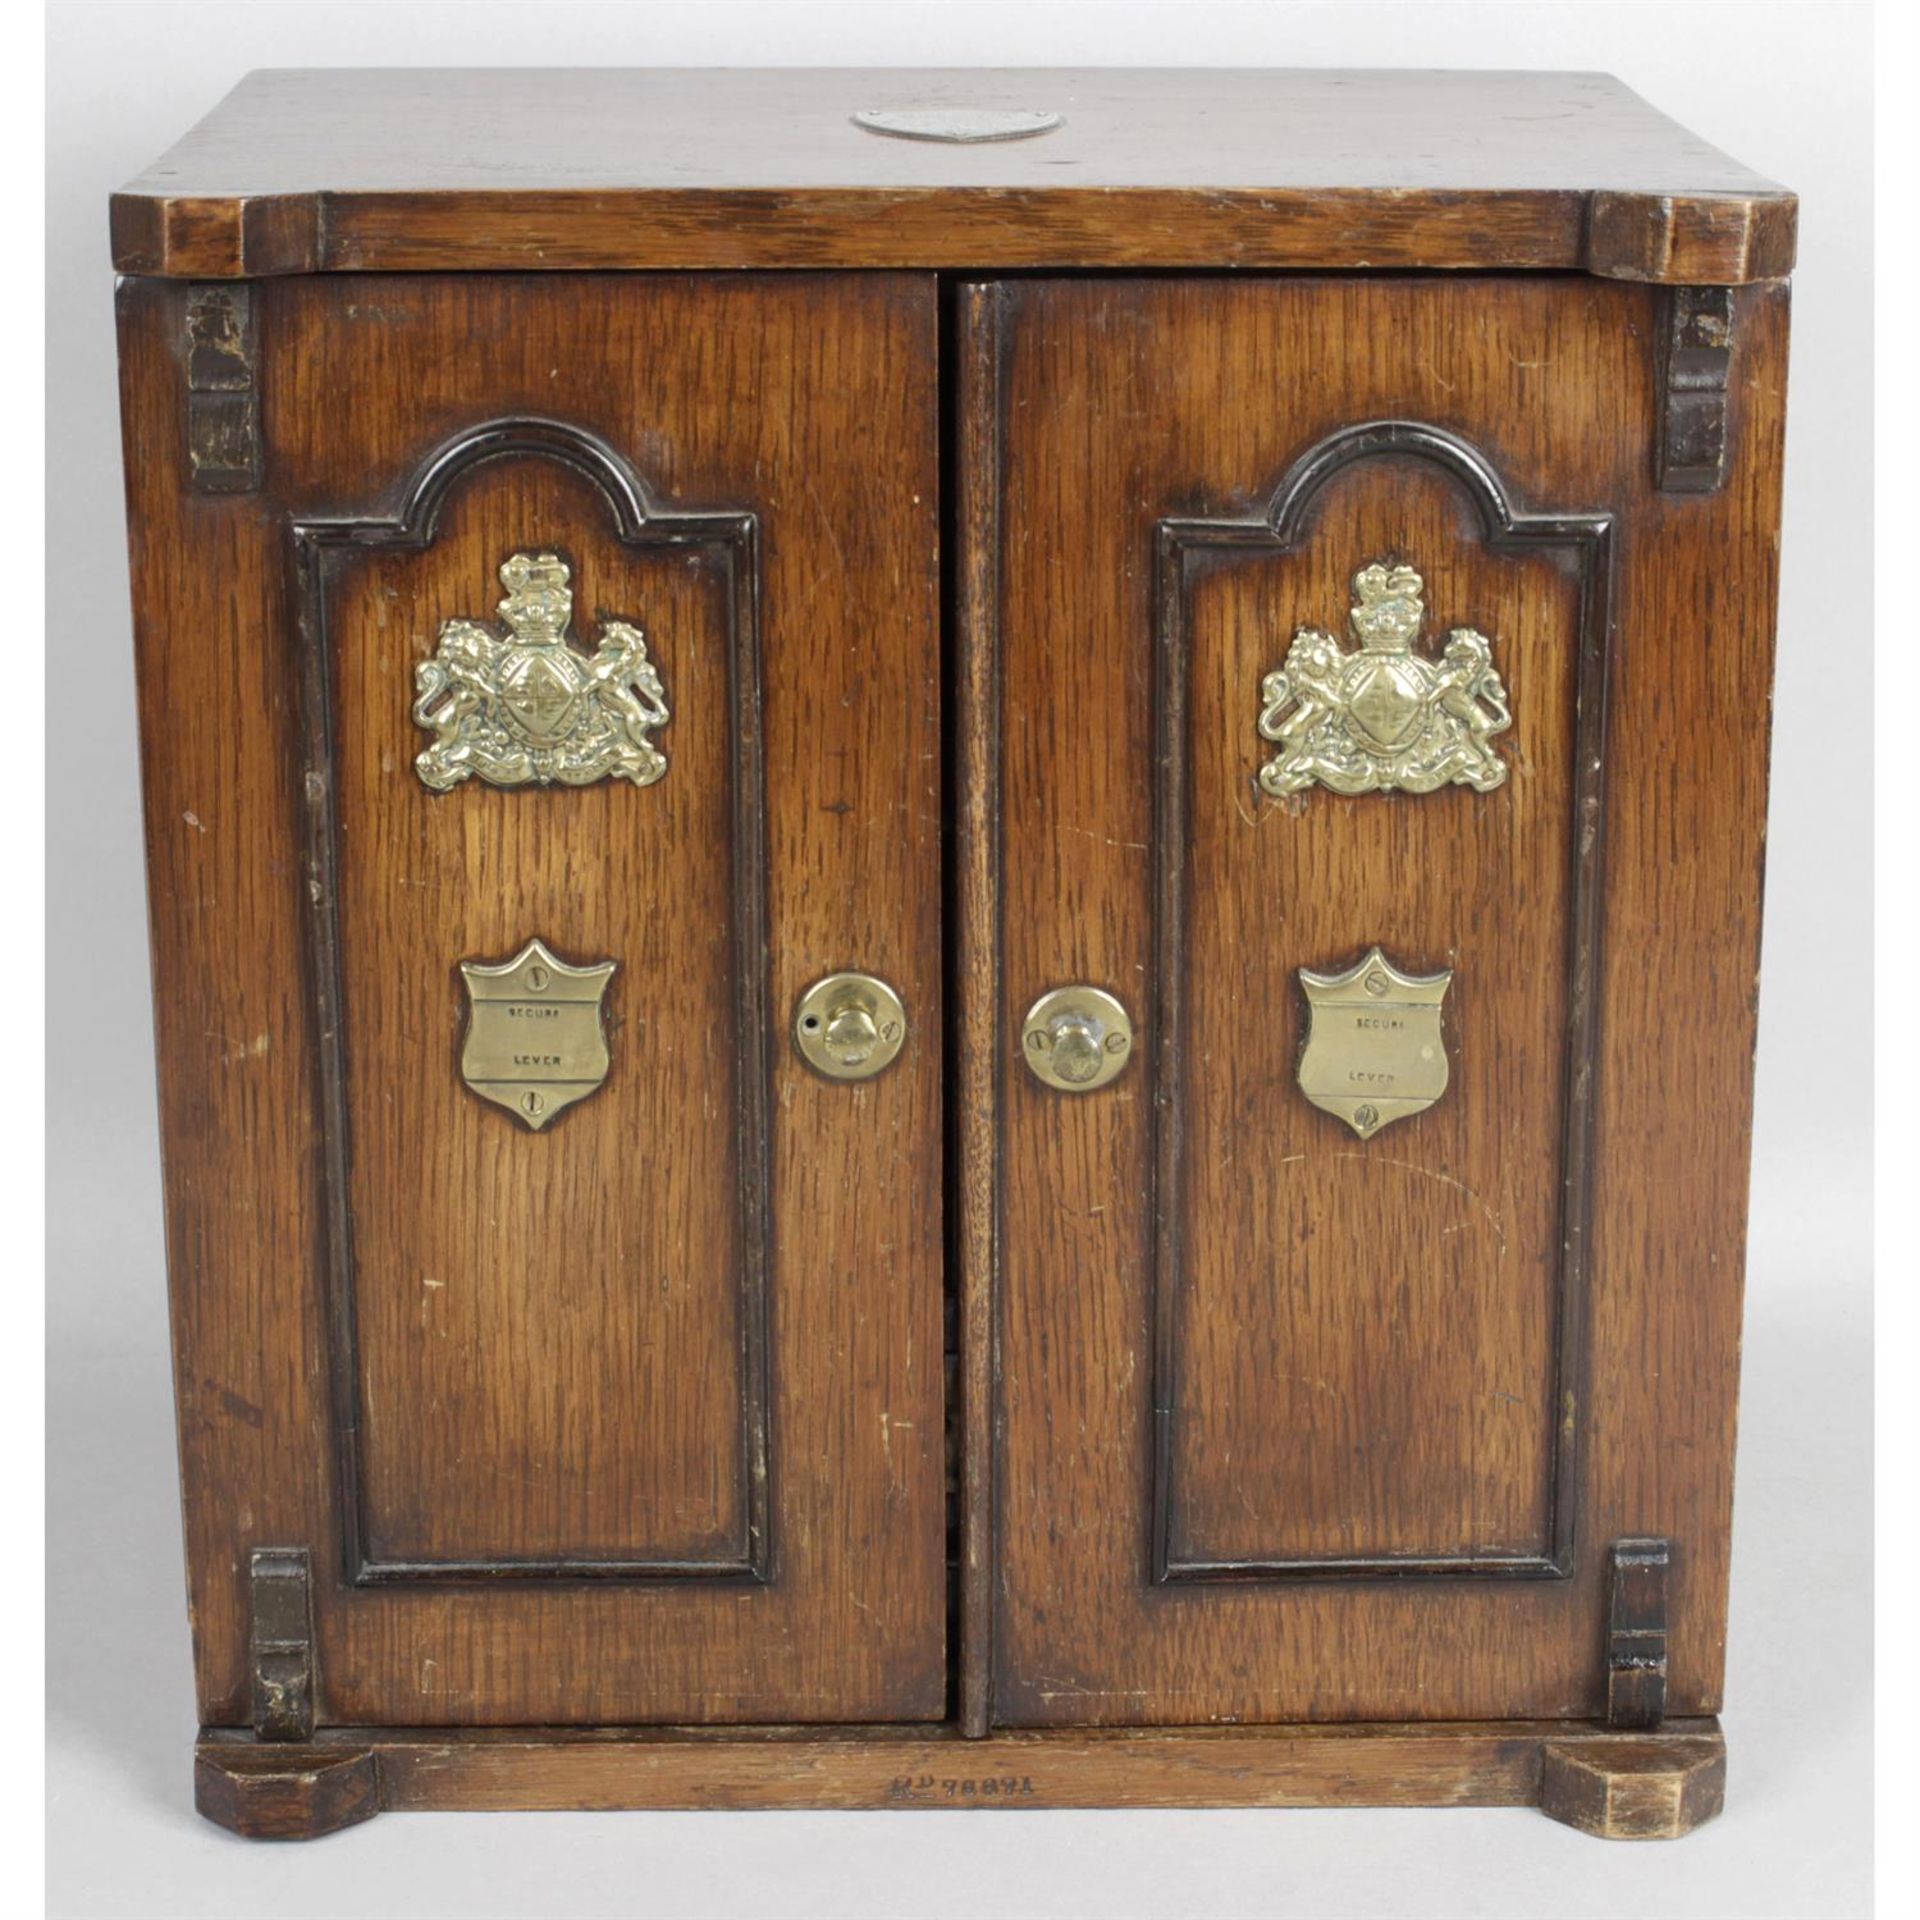 A late 19th century novelty oak smokers cabinet modelled as a twin door safe